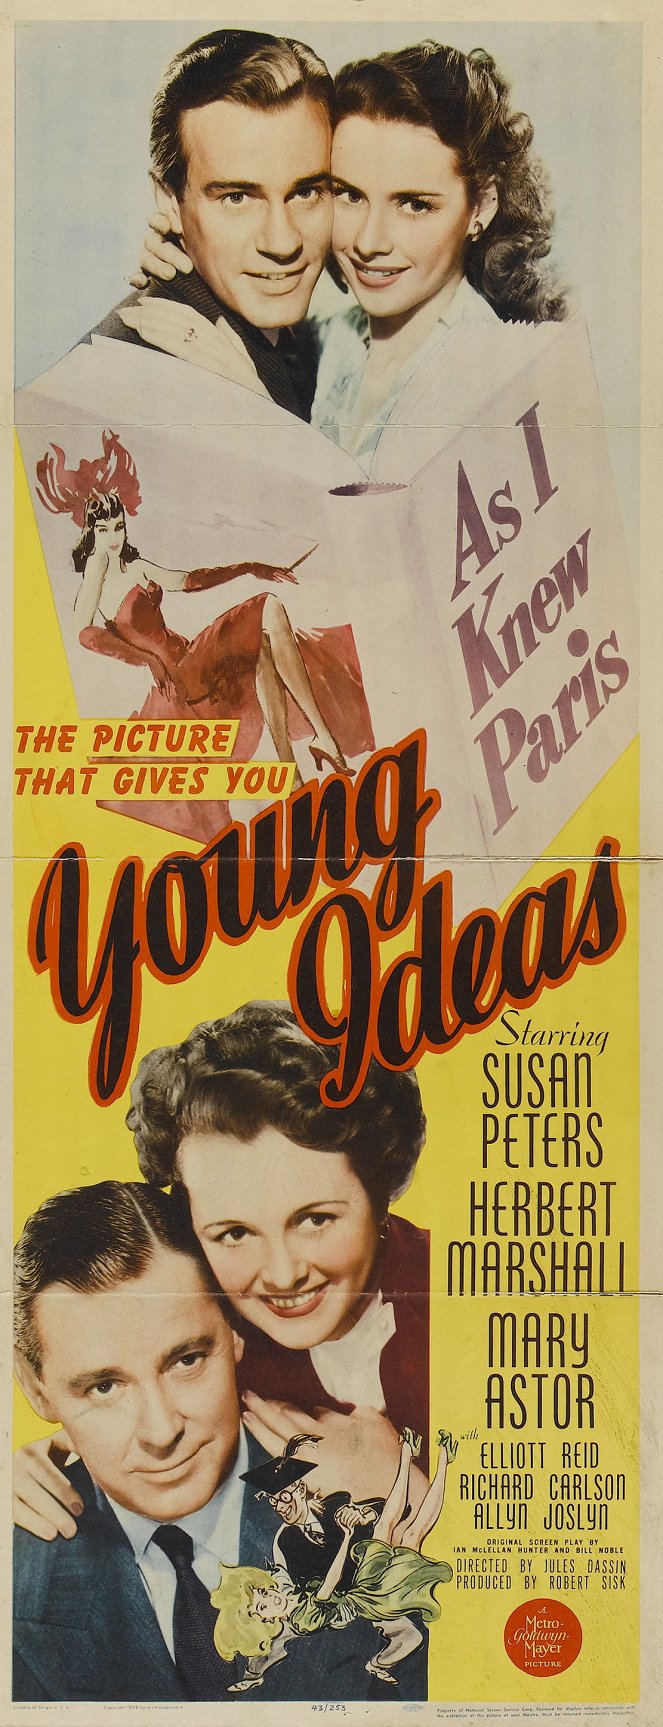 Young Ideas - Plakate